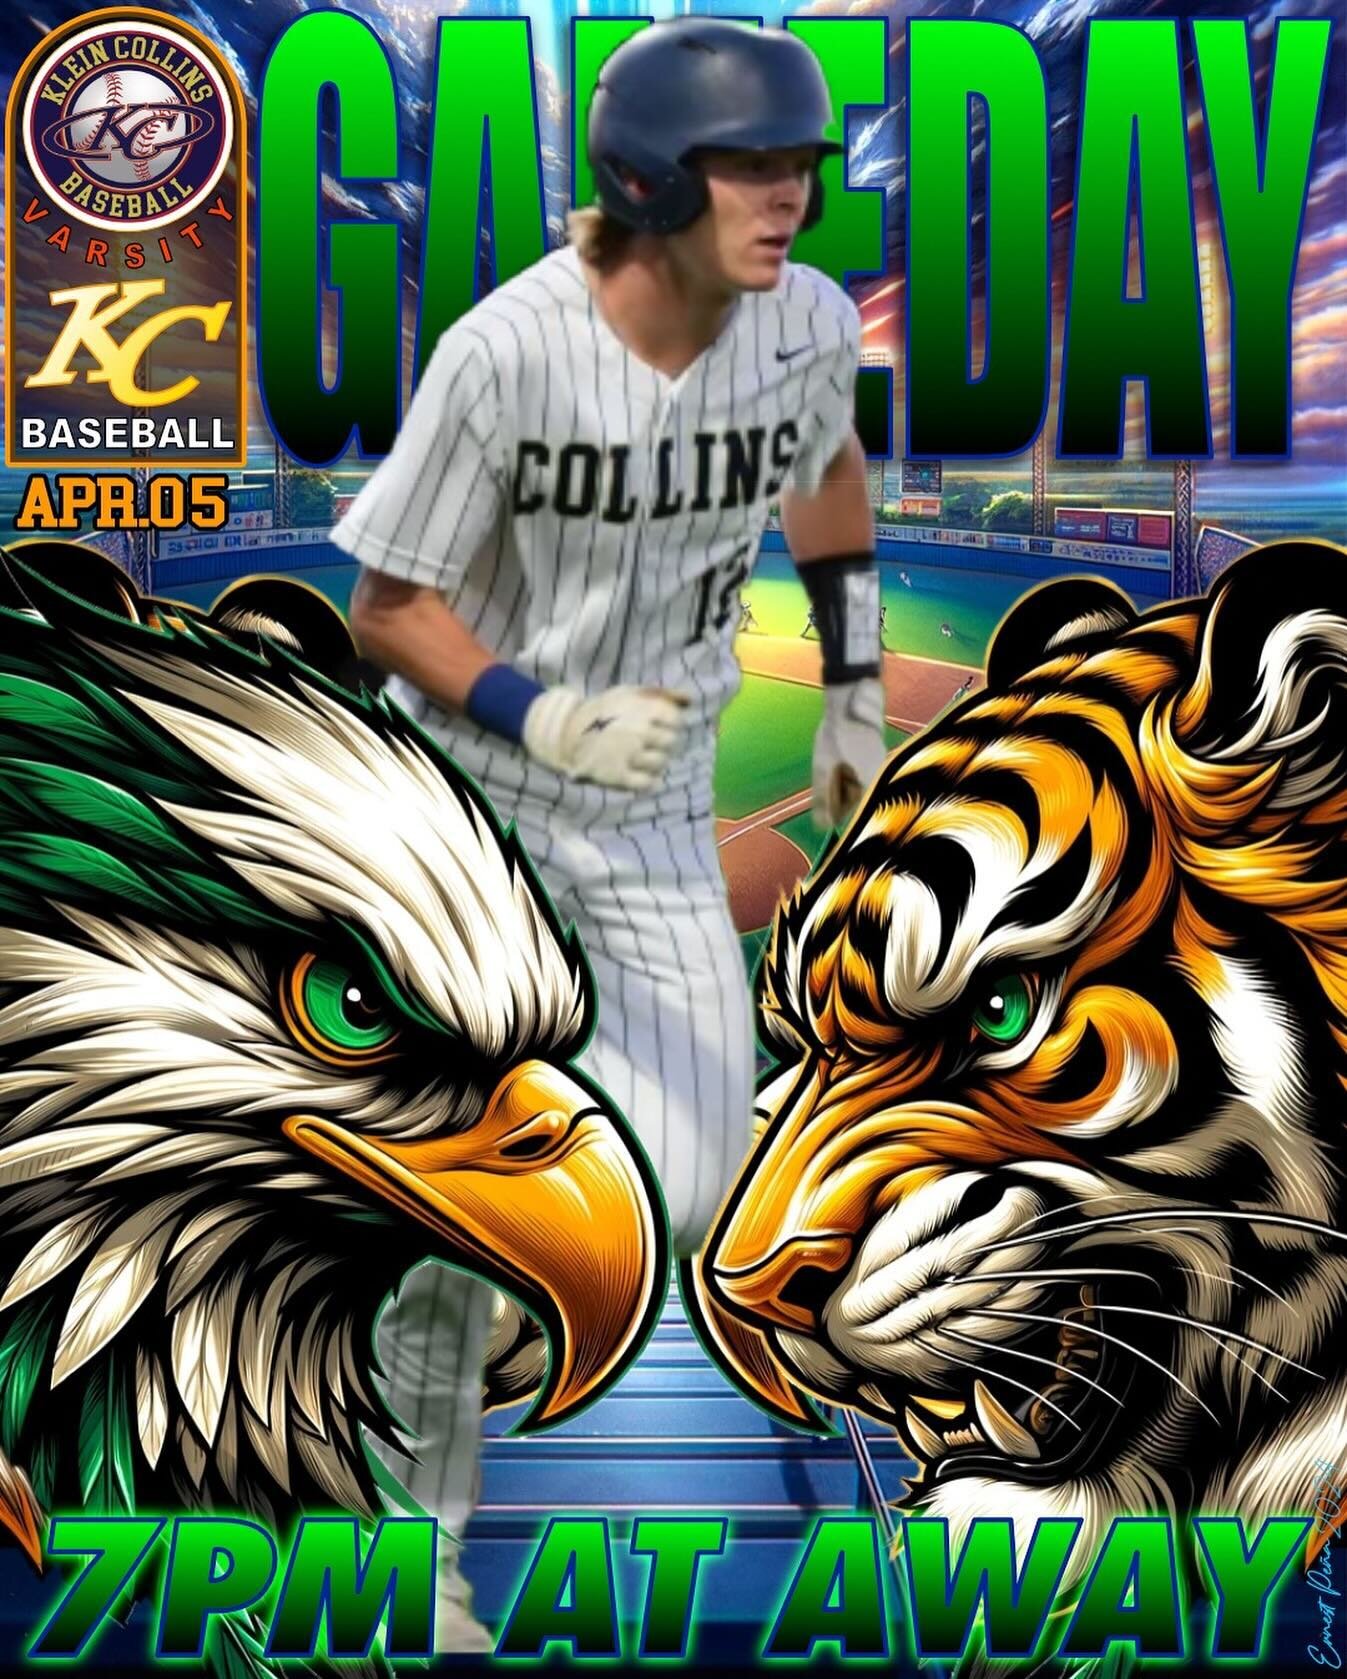 It's Friday! And it's game day! #gameday #districtgame #lfg #pghs #tigers #kc #kleincollins #texasbaseball #awaygame